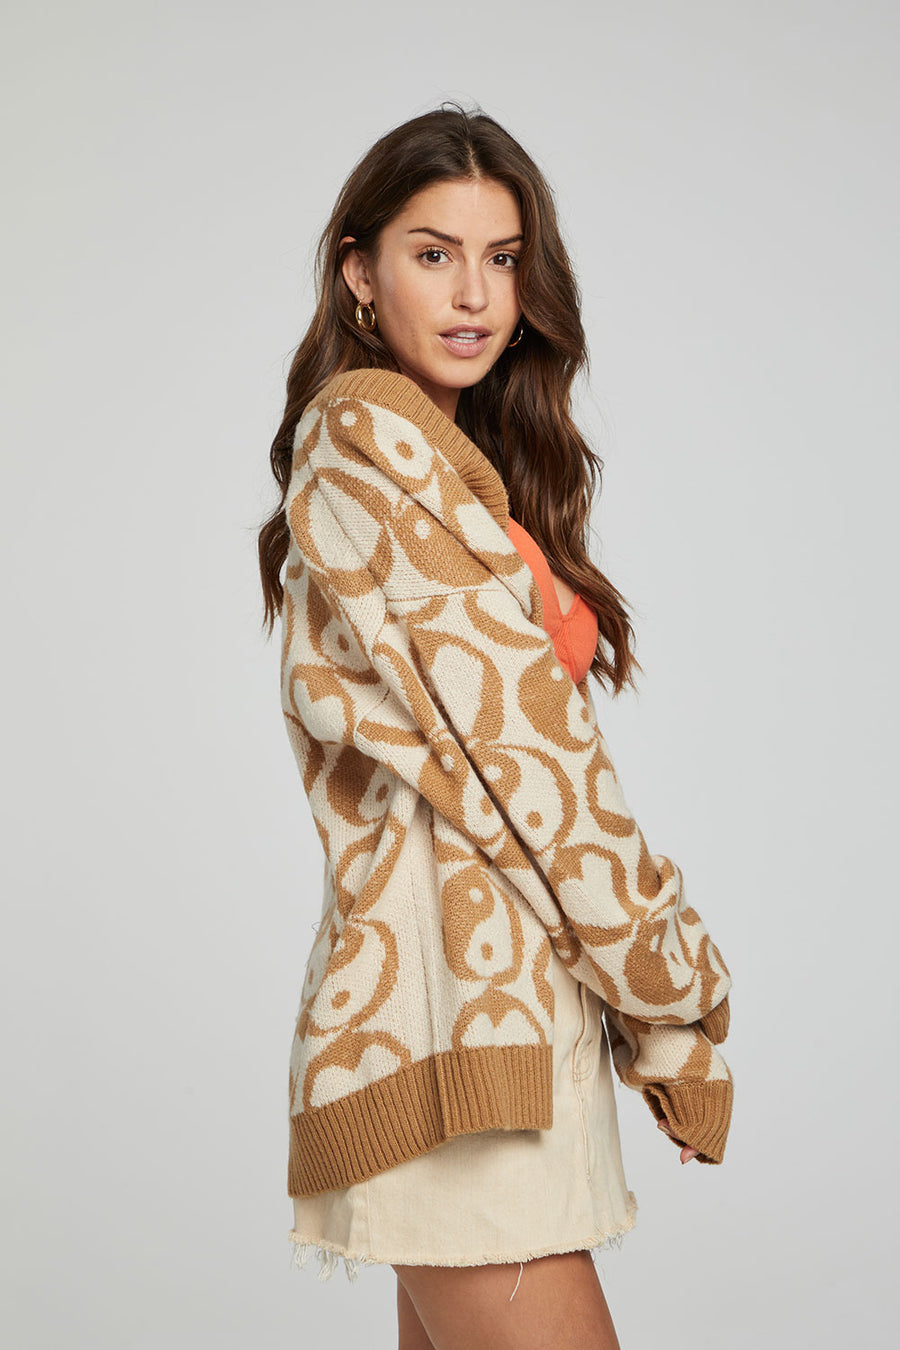 Vibe Cardigan - Latte WOMENS chaserbrand